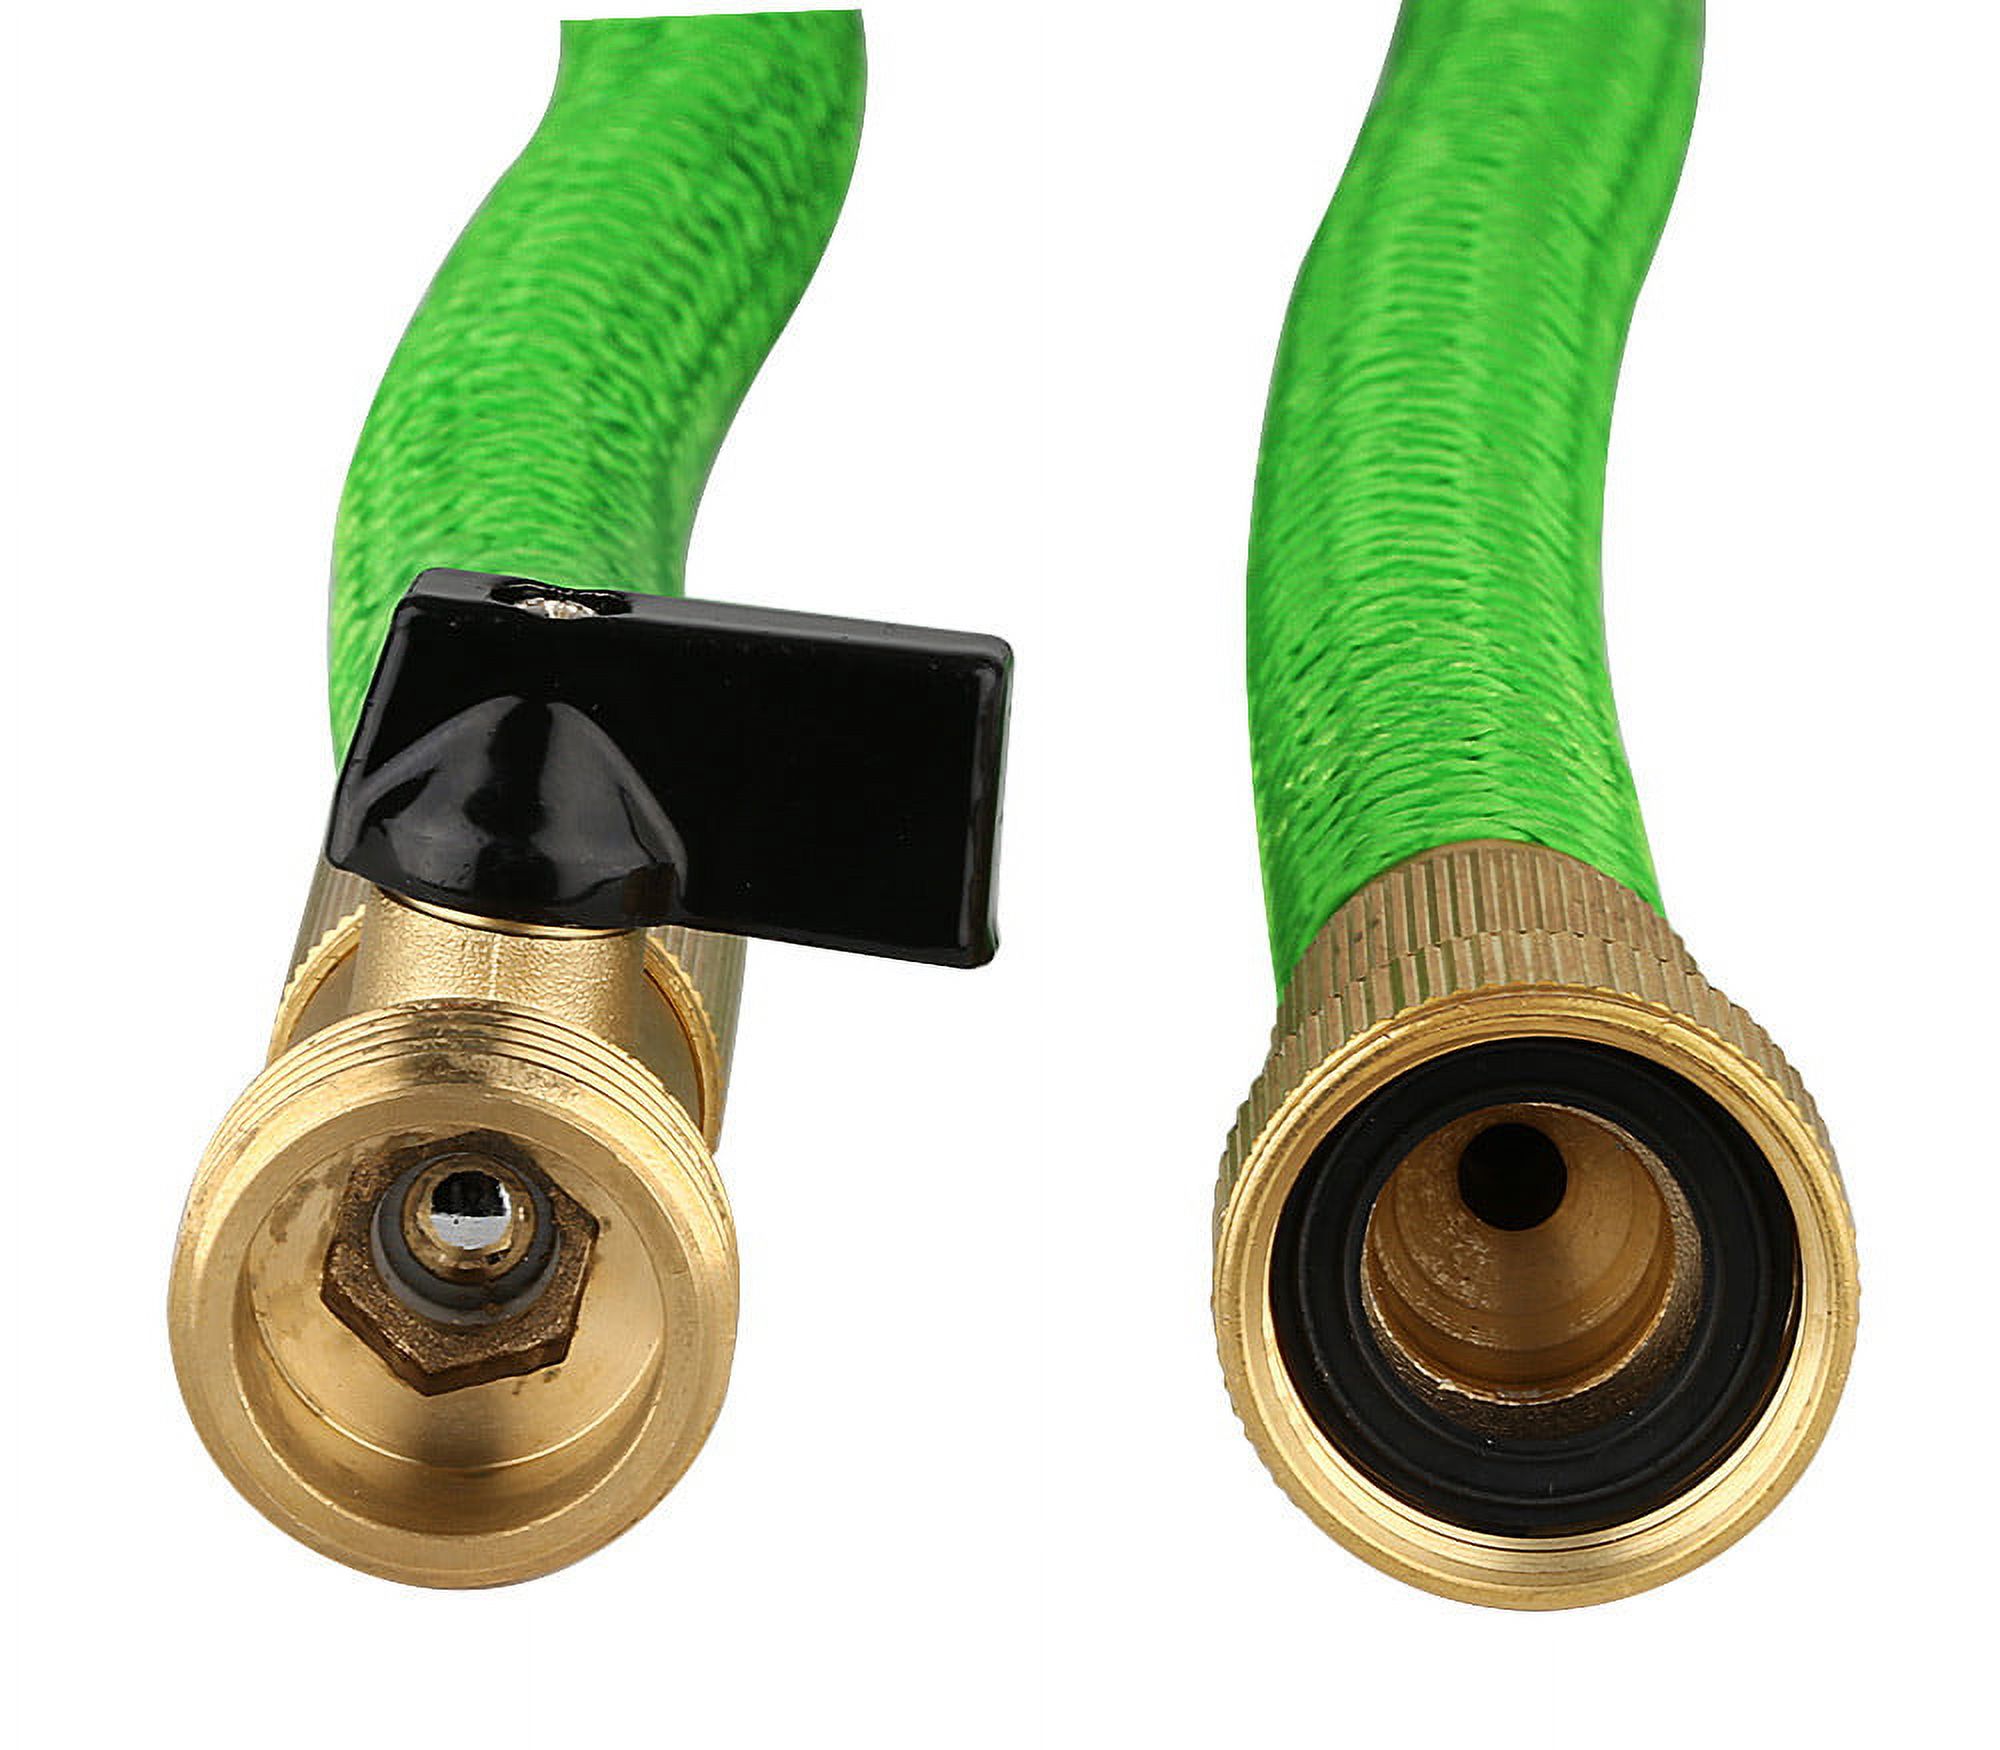 GrowGreen 50' Expandable Garden Water Hose Set with Nozzle - image 3 of 7